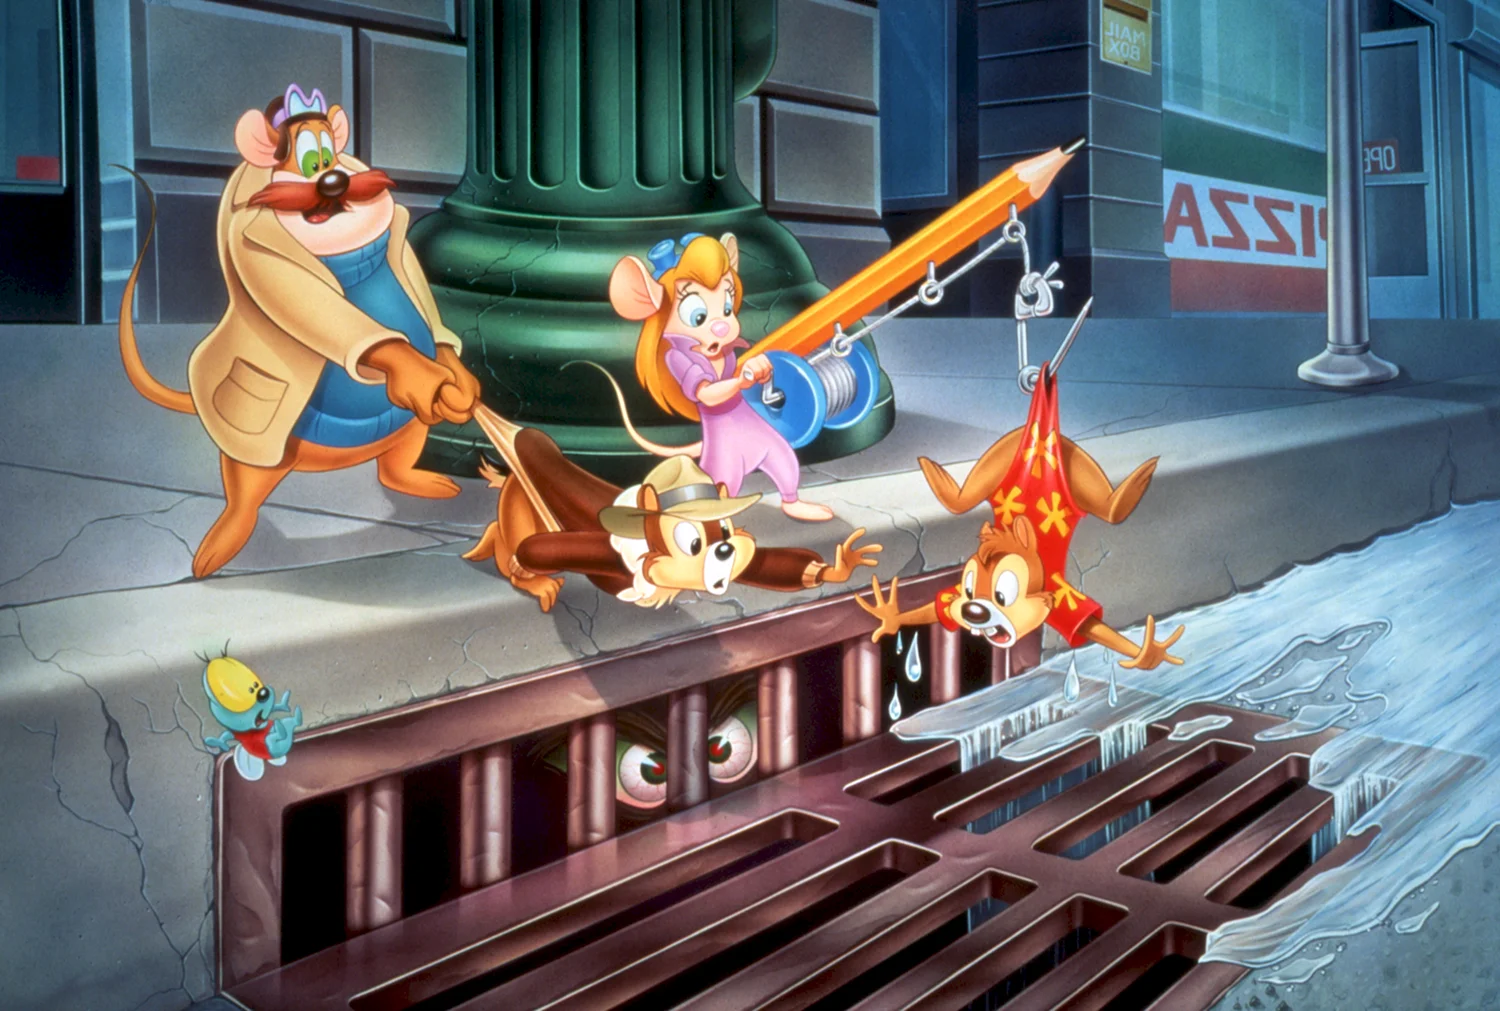 Chip ’n Dale Rescue Rangers